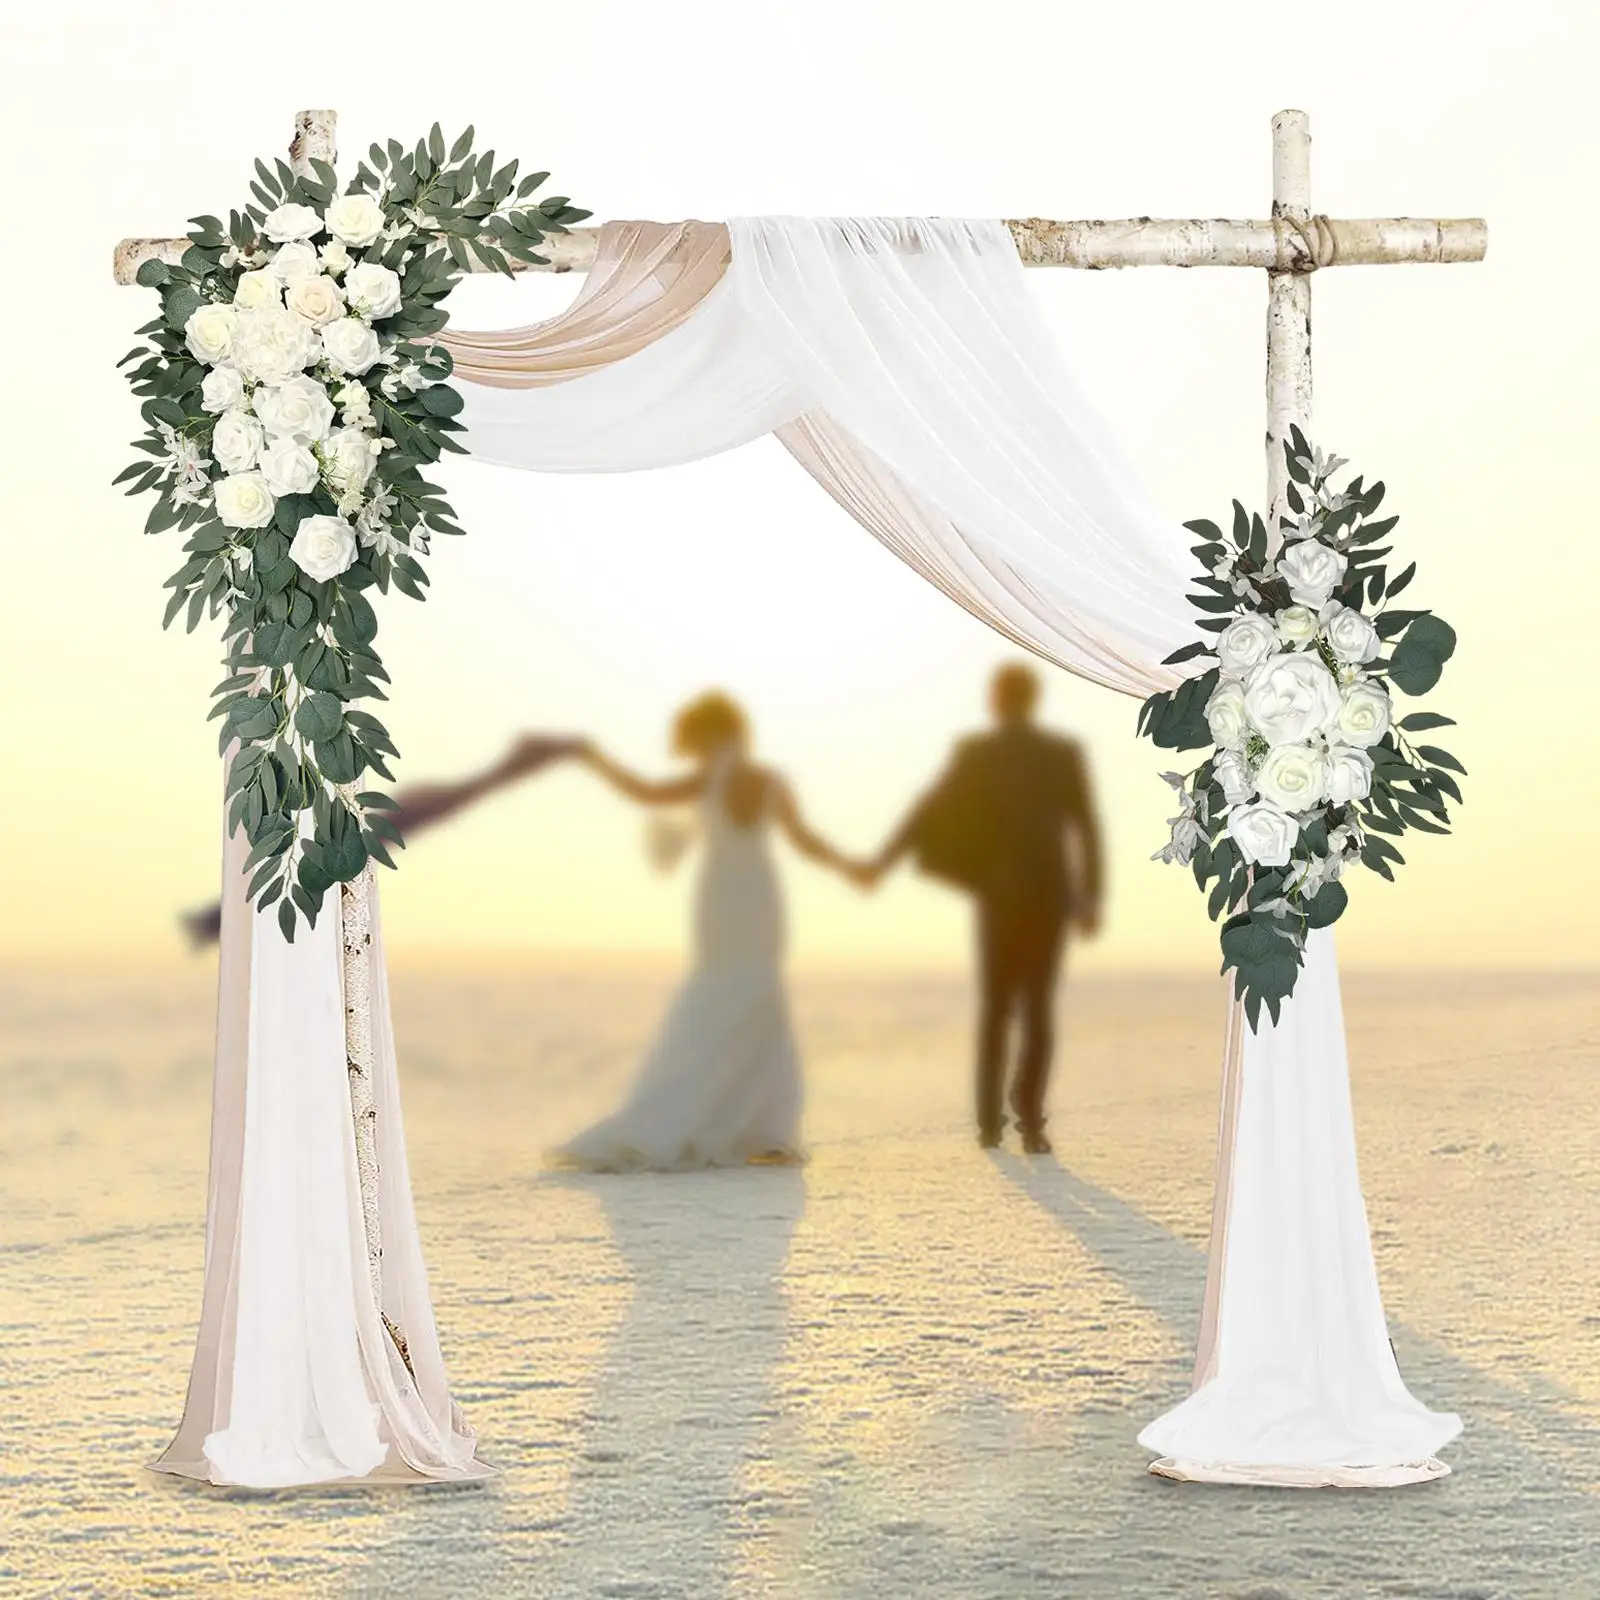 2 Pieces Wedding Arch Flowers Floral Swag Backdrop for Ceremony Reception